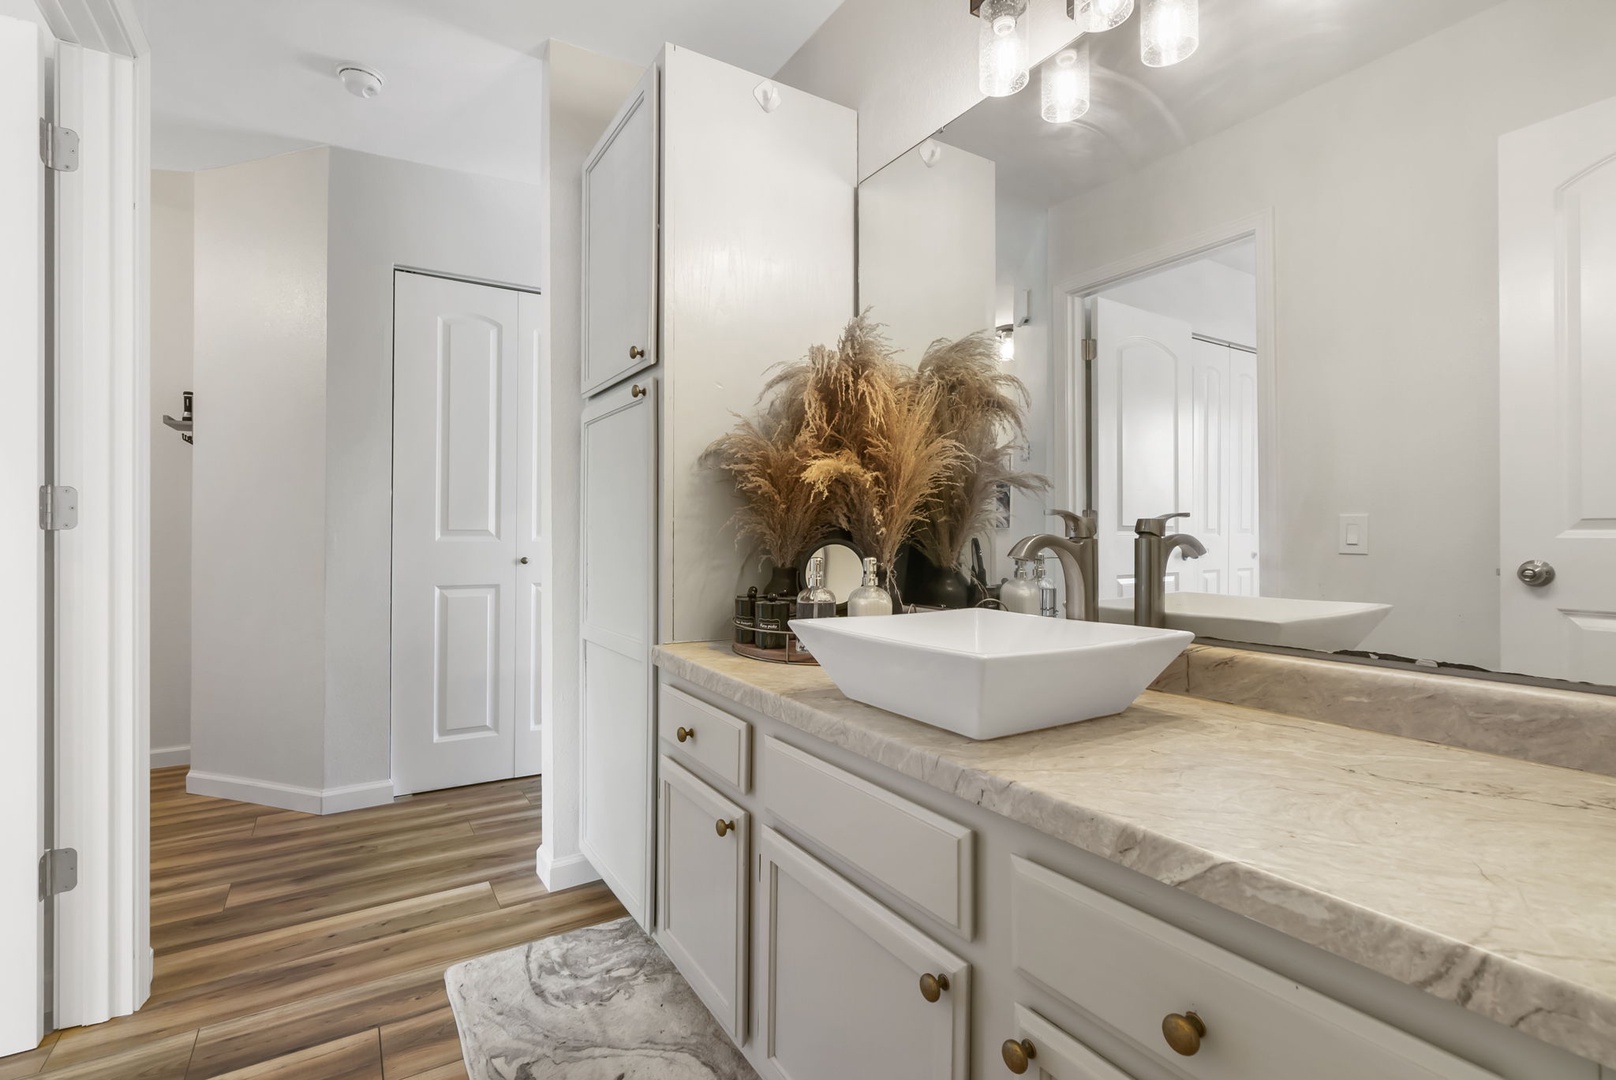 Enjoy ample storage space and beautiful finishes in the Bathroom, offering a Shower/Tub Combo